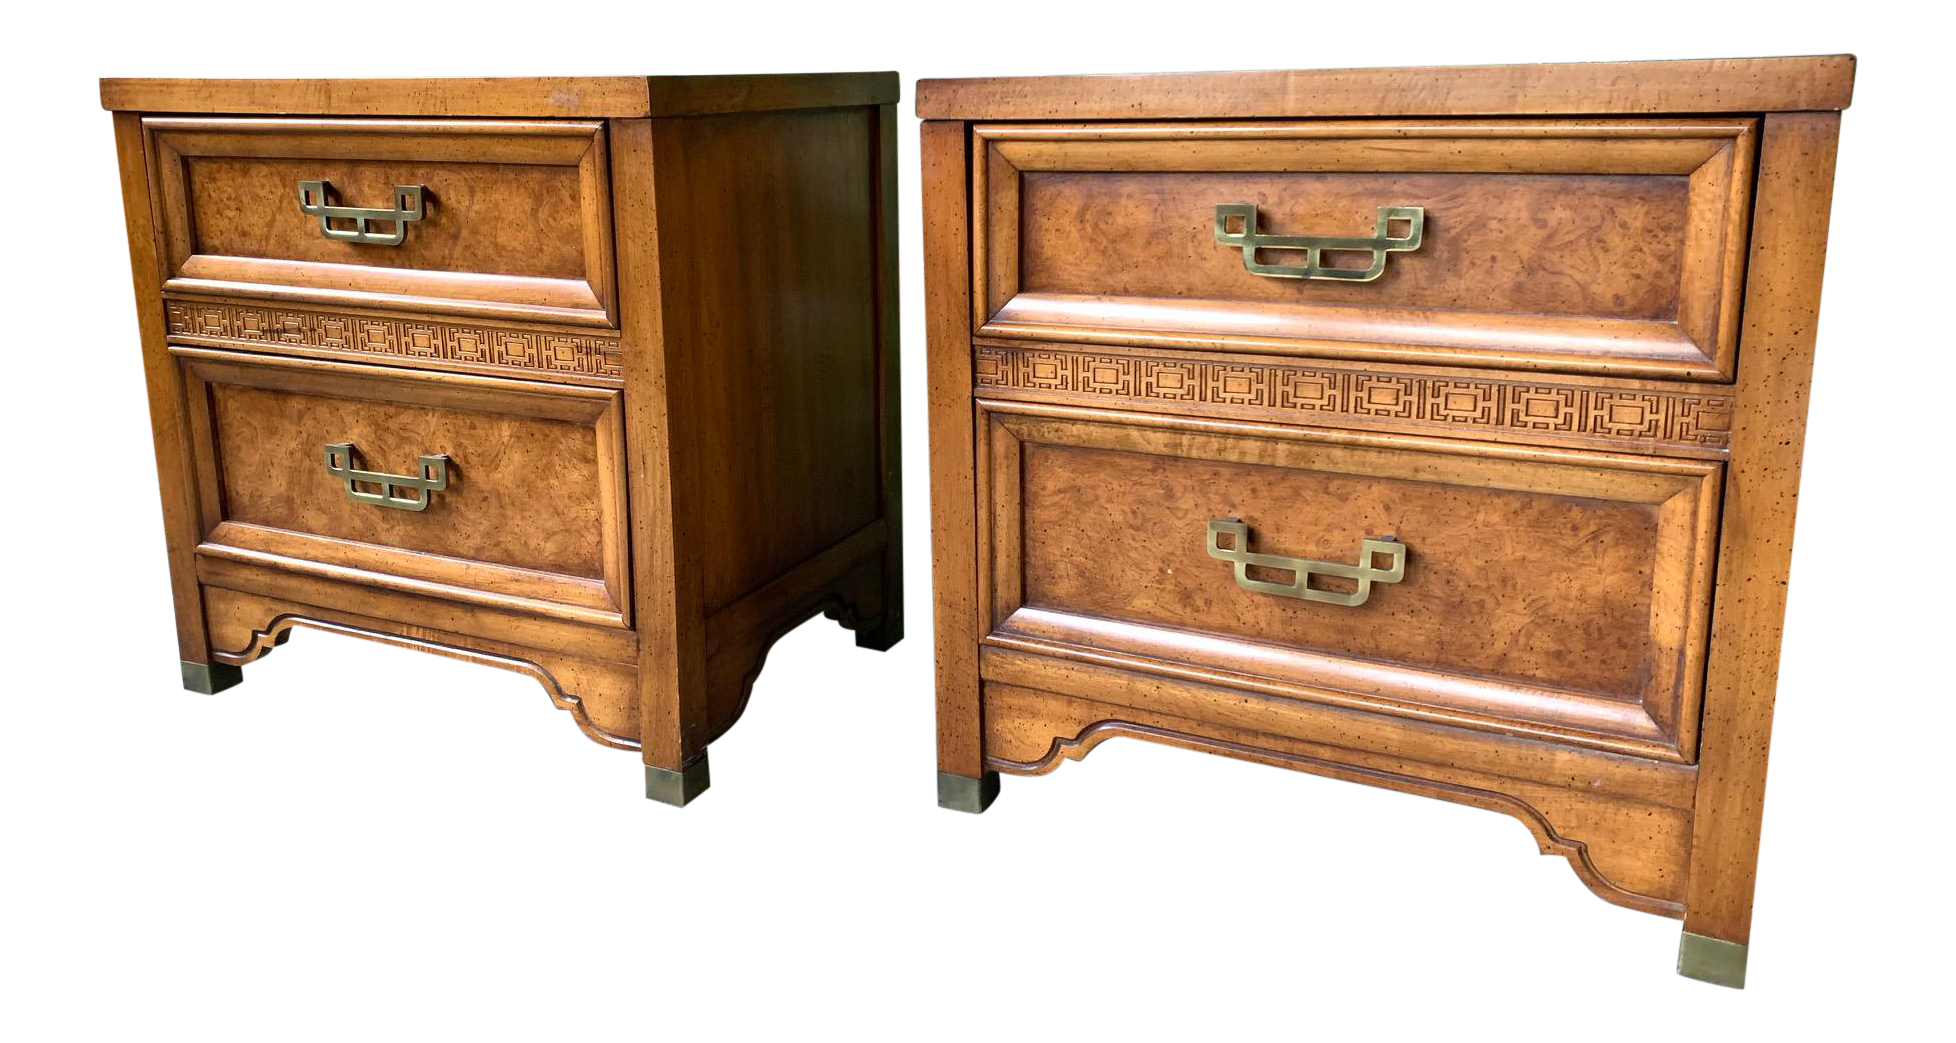 Pair of Burl Nightstands by Henry Link From the Mandarin Collection